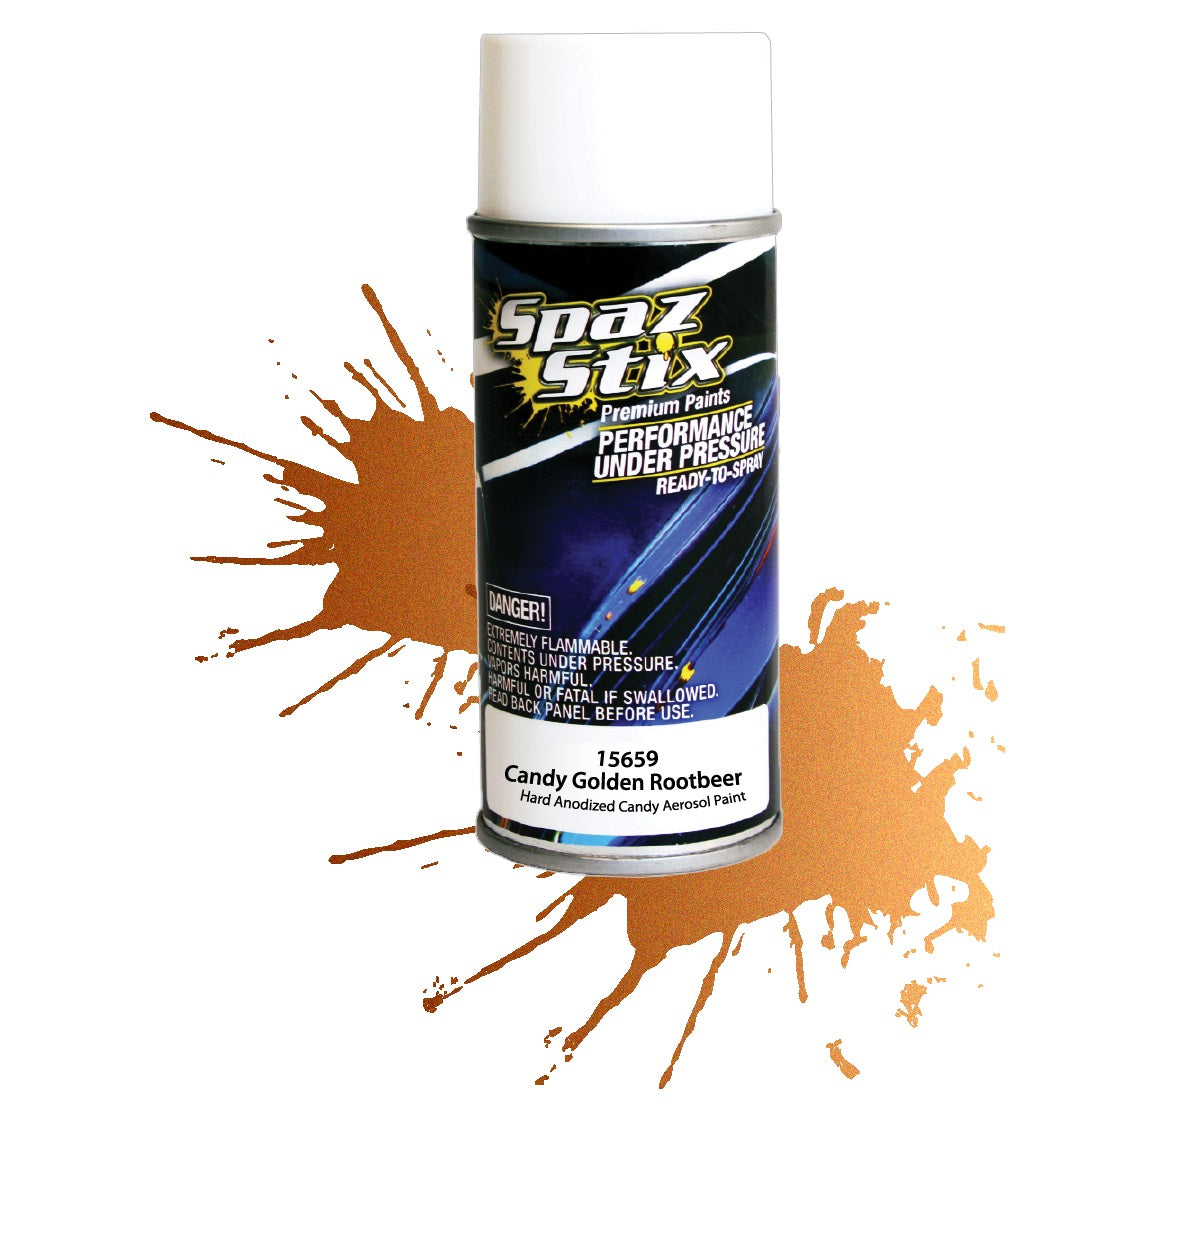 Spazstix Aerosol Paint 3.5oz Can (Candy Rootbeer)